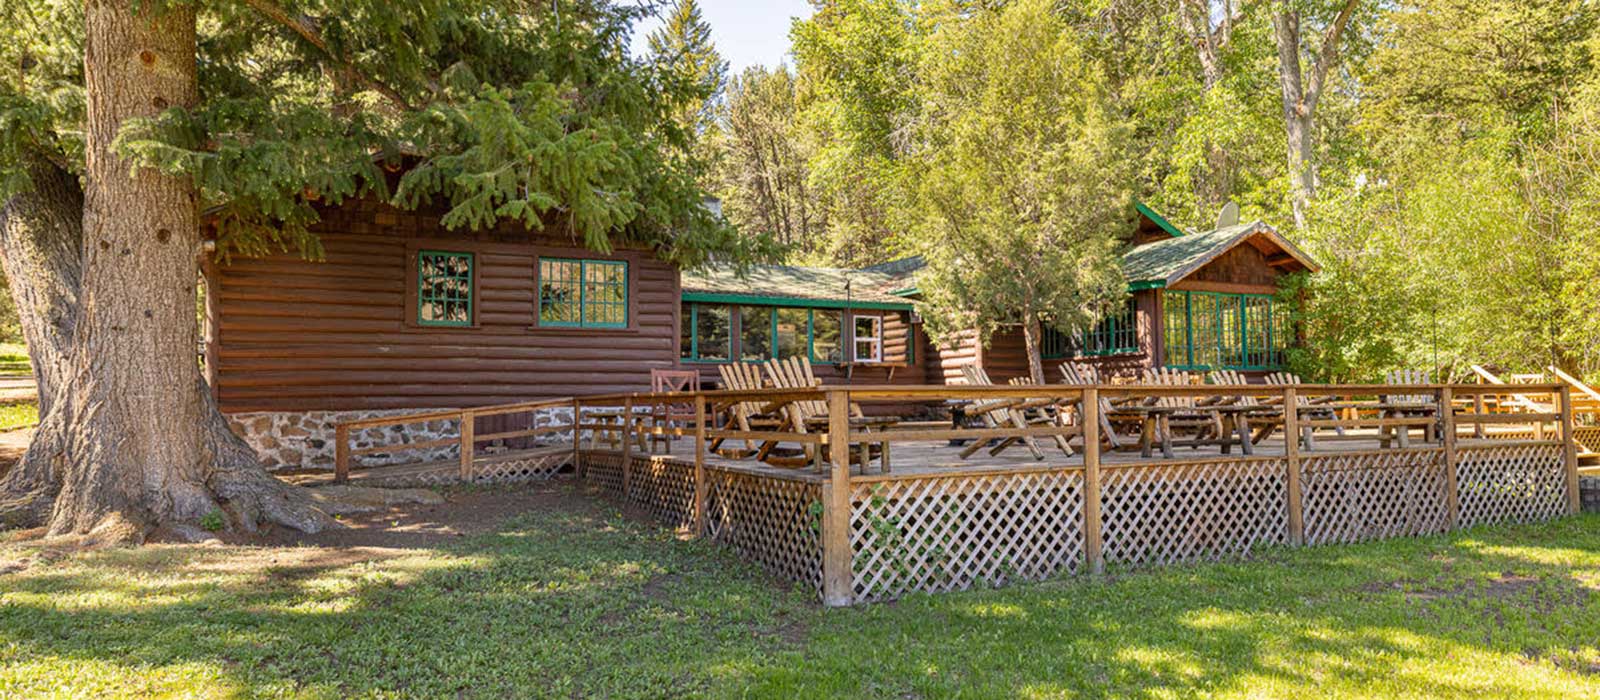 UXU Lodge - Just 17 miles from East Gate of Yellowstone National Park